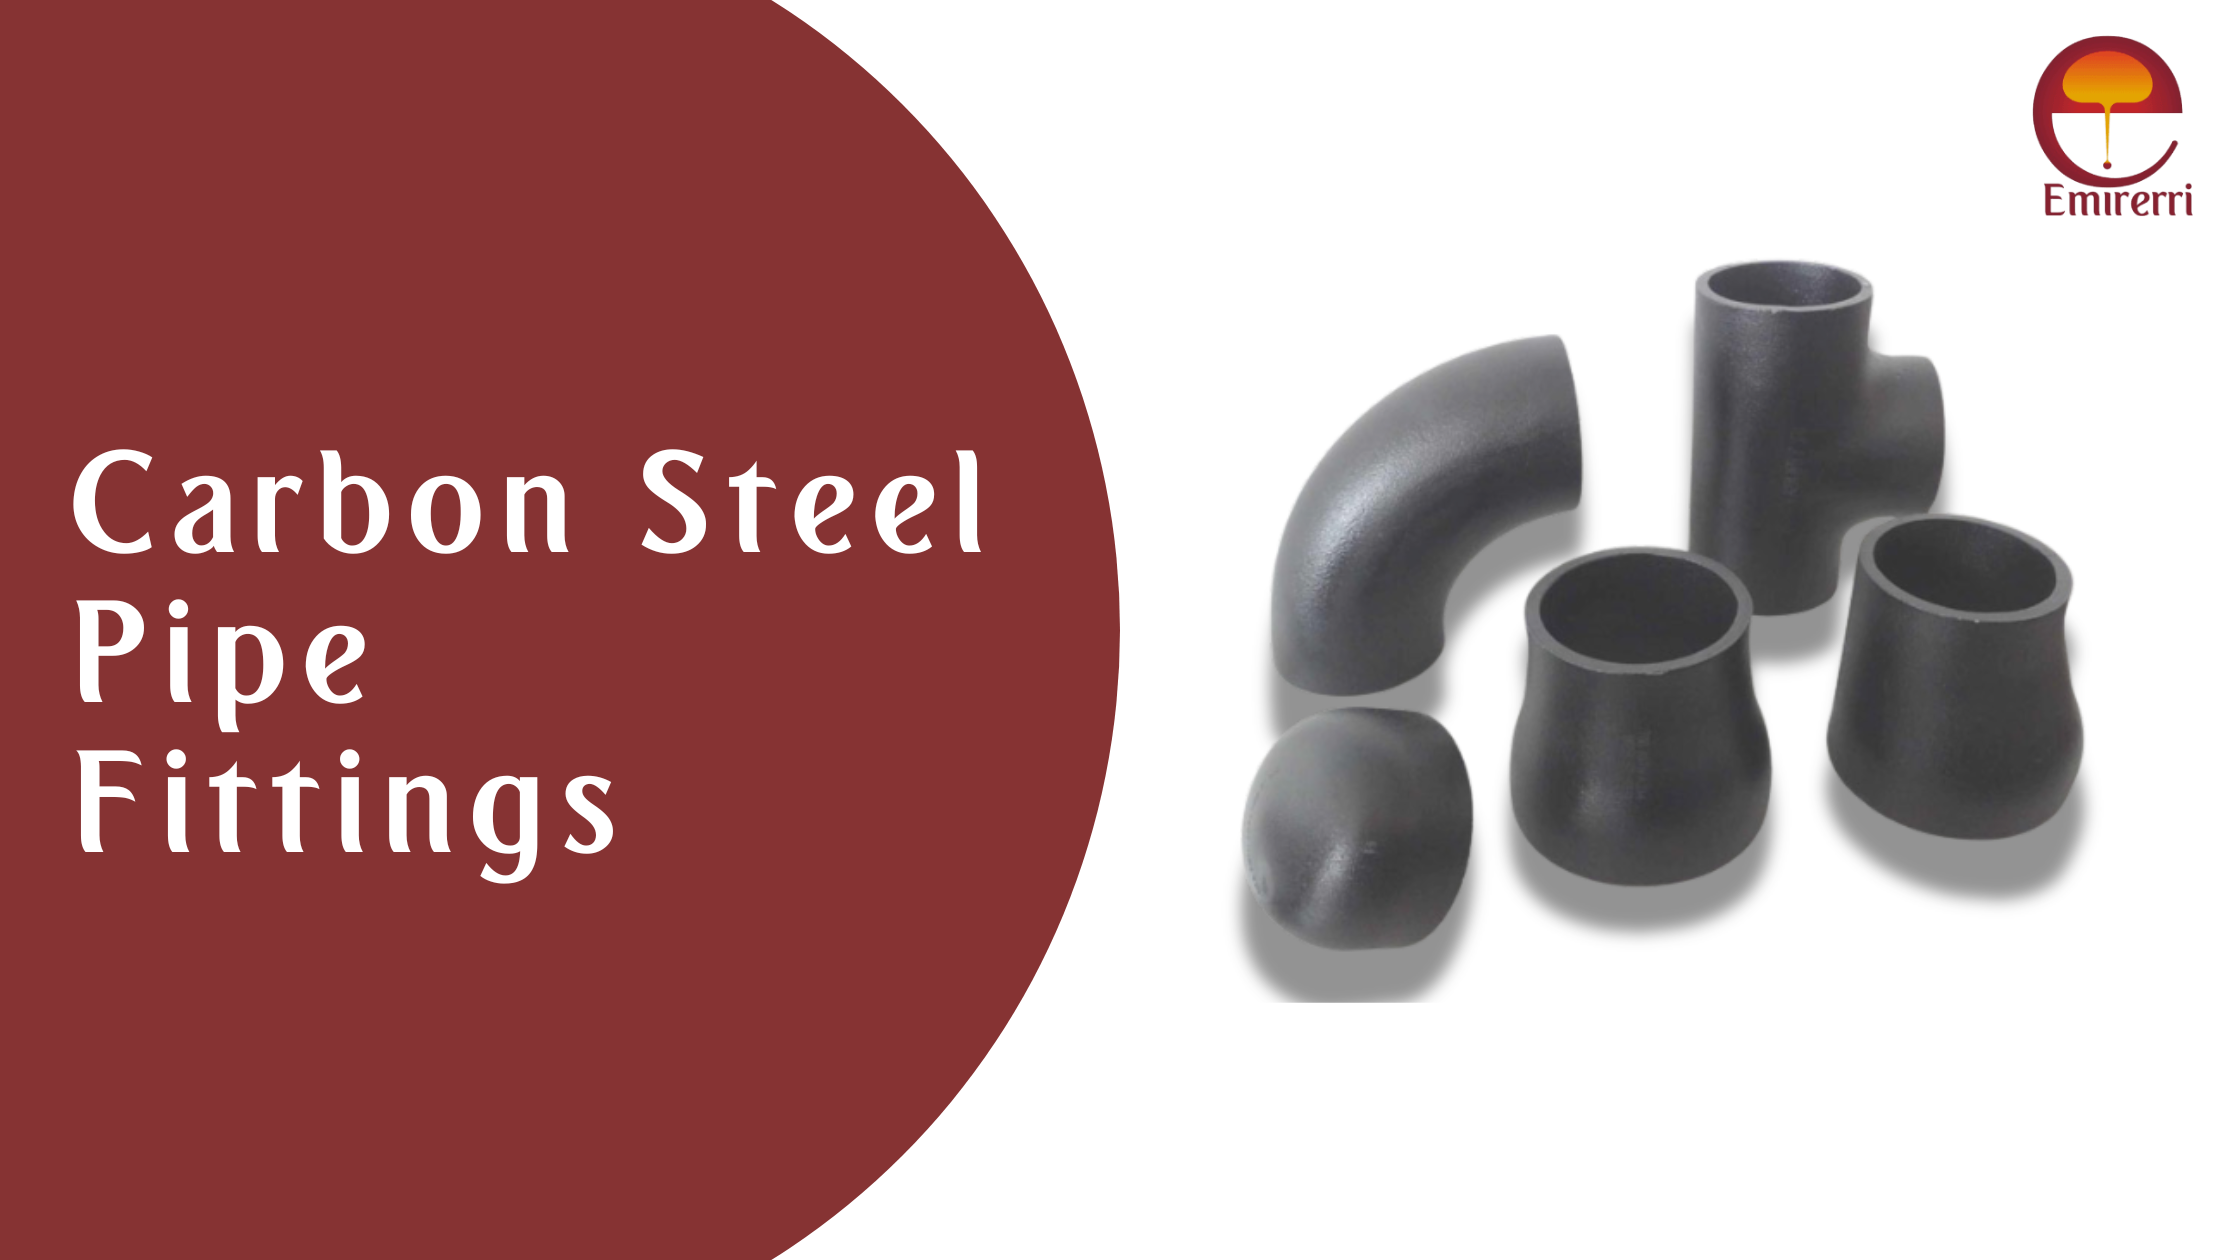 Carbon Steel Pipe Fitting Blog Banner Image